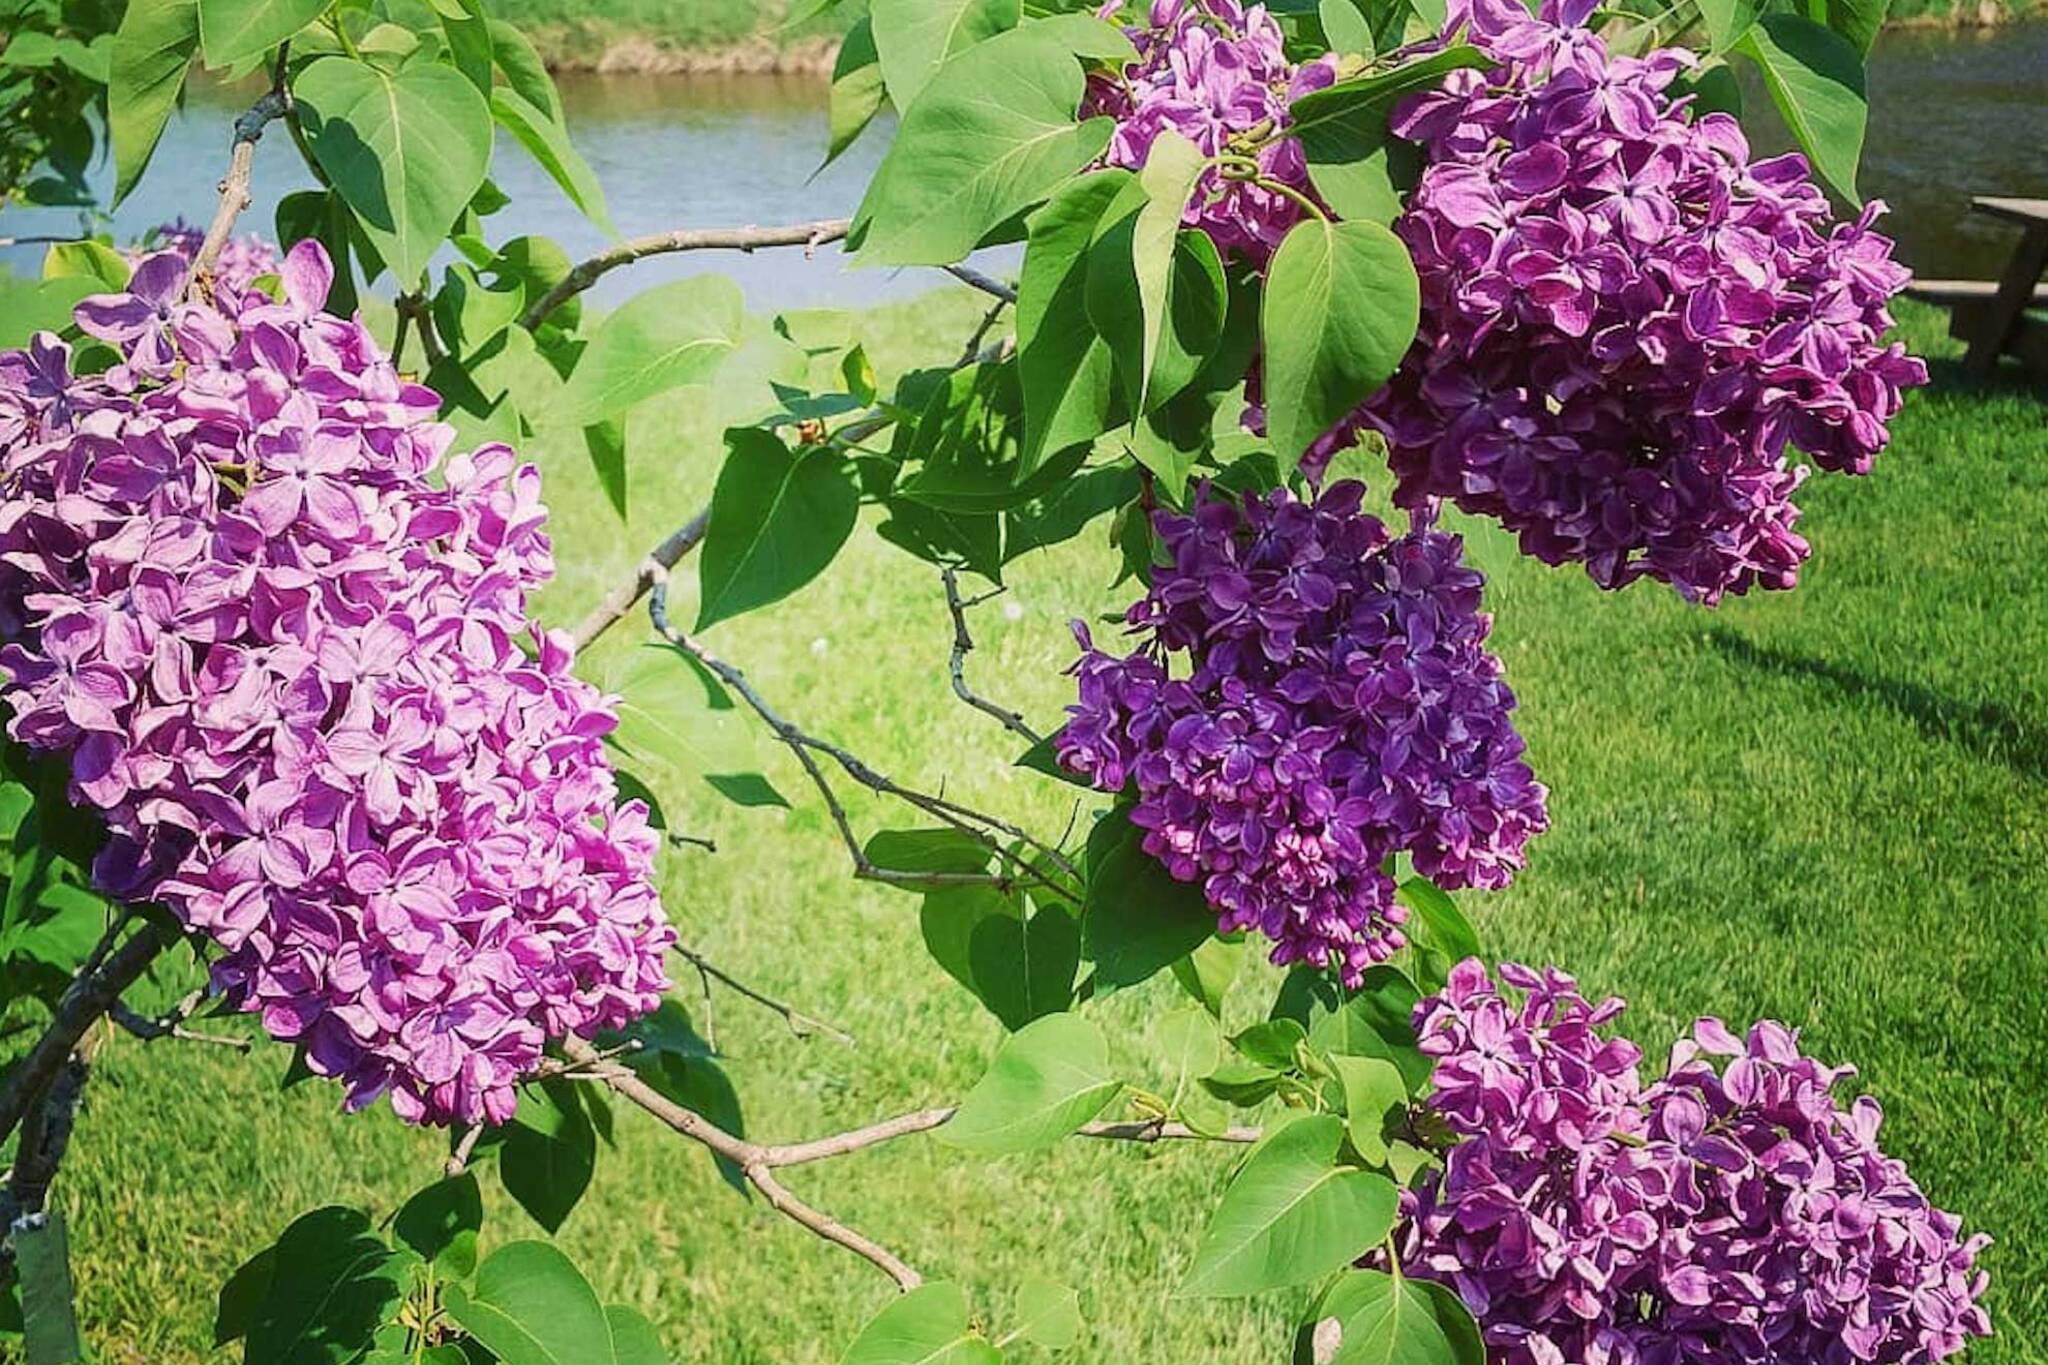 There's a spectacular lilac festival near Toronto this spring